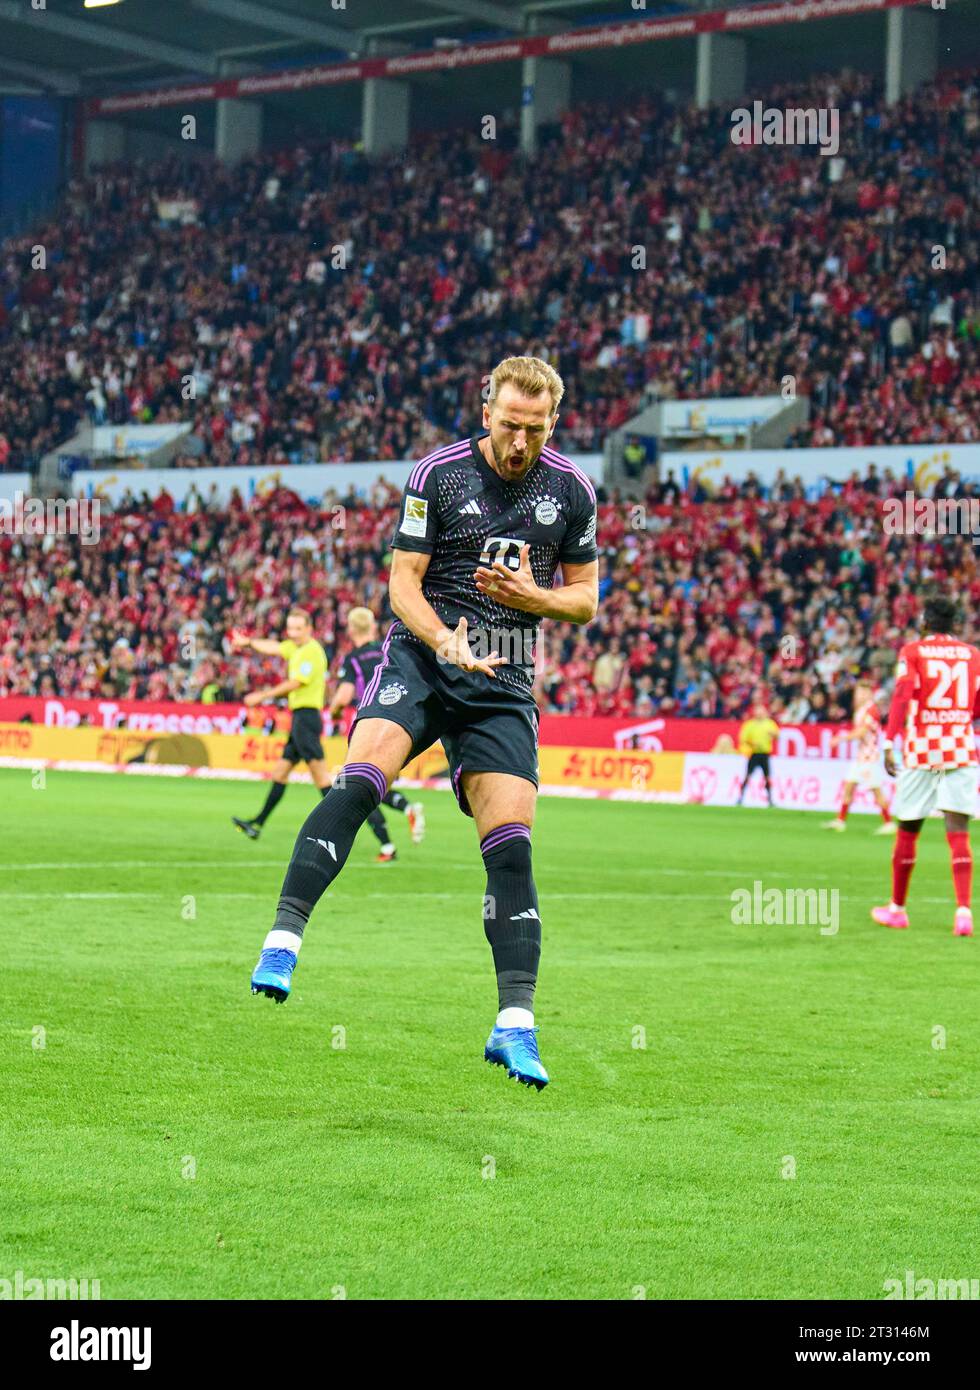 Harry Kane, FCB 9 celebrates his 0-2 goal, happy, laugh, celebration,   in the match 1. FSV MAINZ 05 -  FC BAYERN MUENCHEN  1-3  on Oct 21, 2023 in Mainz, Germany. Season 2023/2024, 1.Bundesliga, FCB, München, matchday 8, 8.Spieltag © Peter Schatz / Alamy Live News    - DFL REGULATIONS PROHIBIT ANY USE OF PHOTOGRAPHS as IMAGE SEQUENCES and/or QUASI-VIDEO - Stock Photo